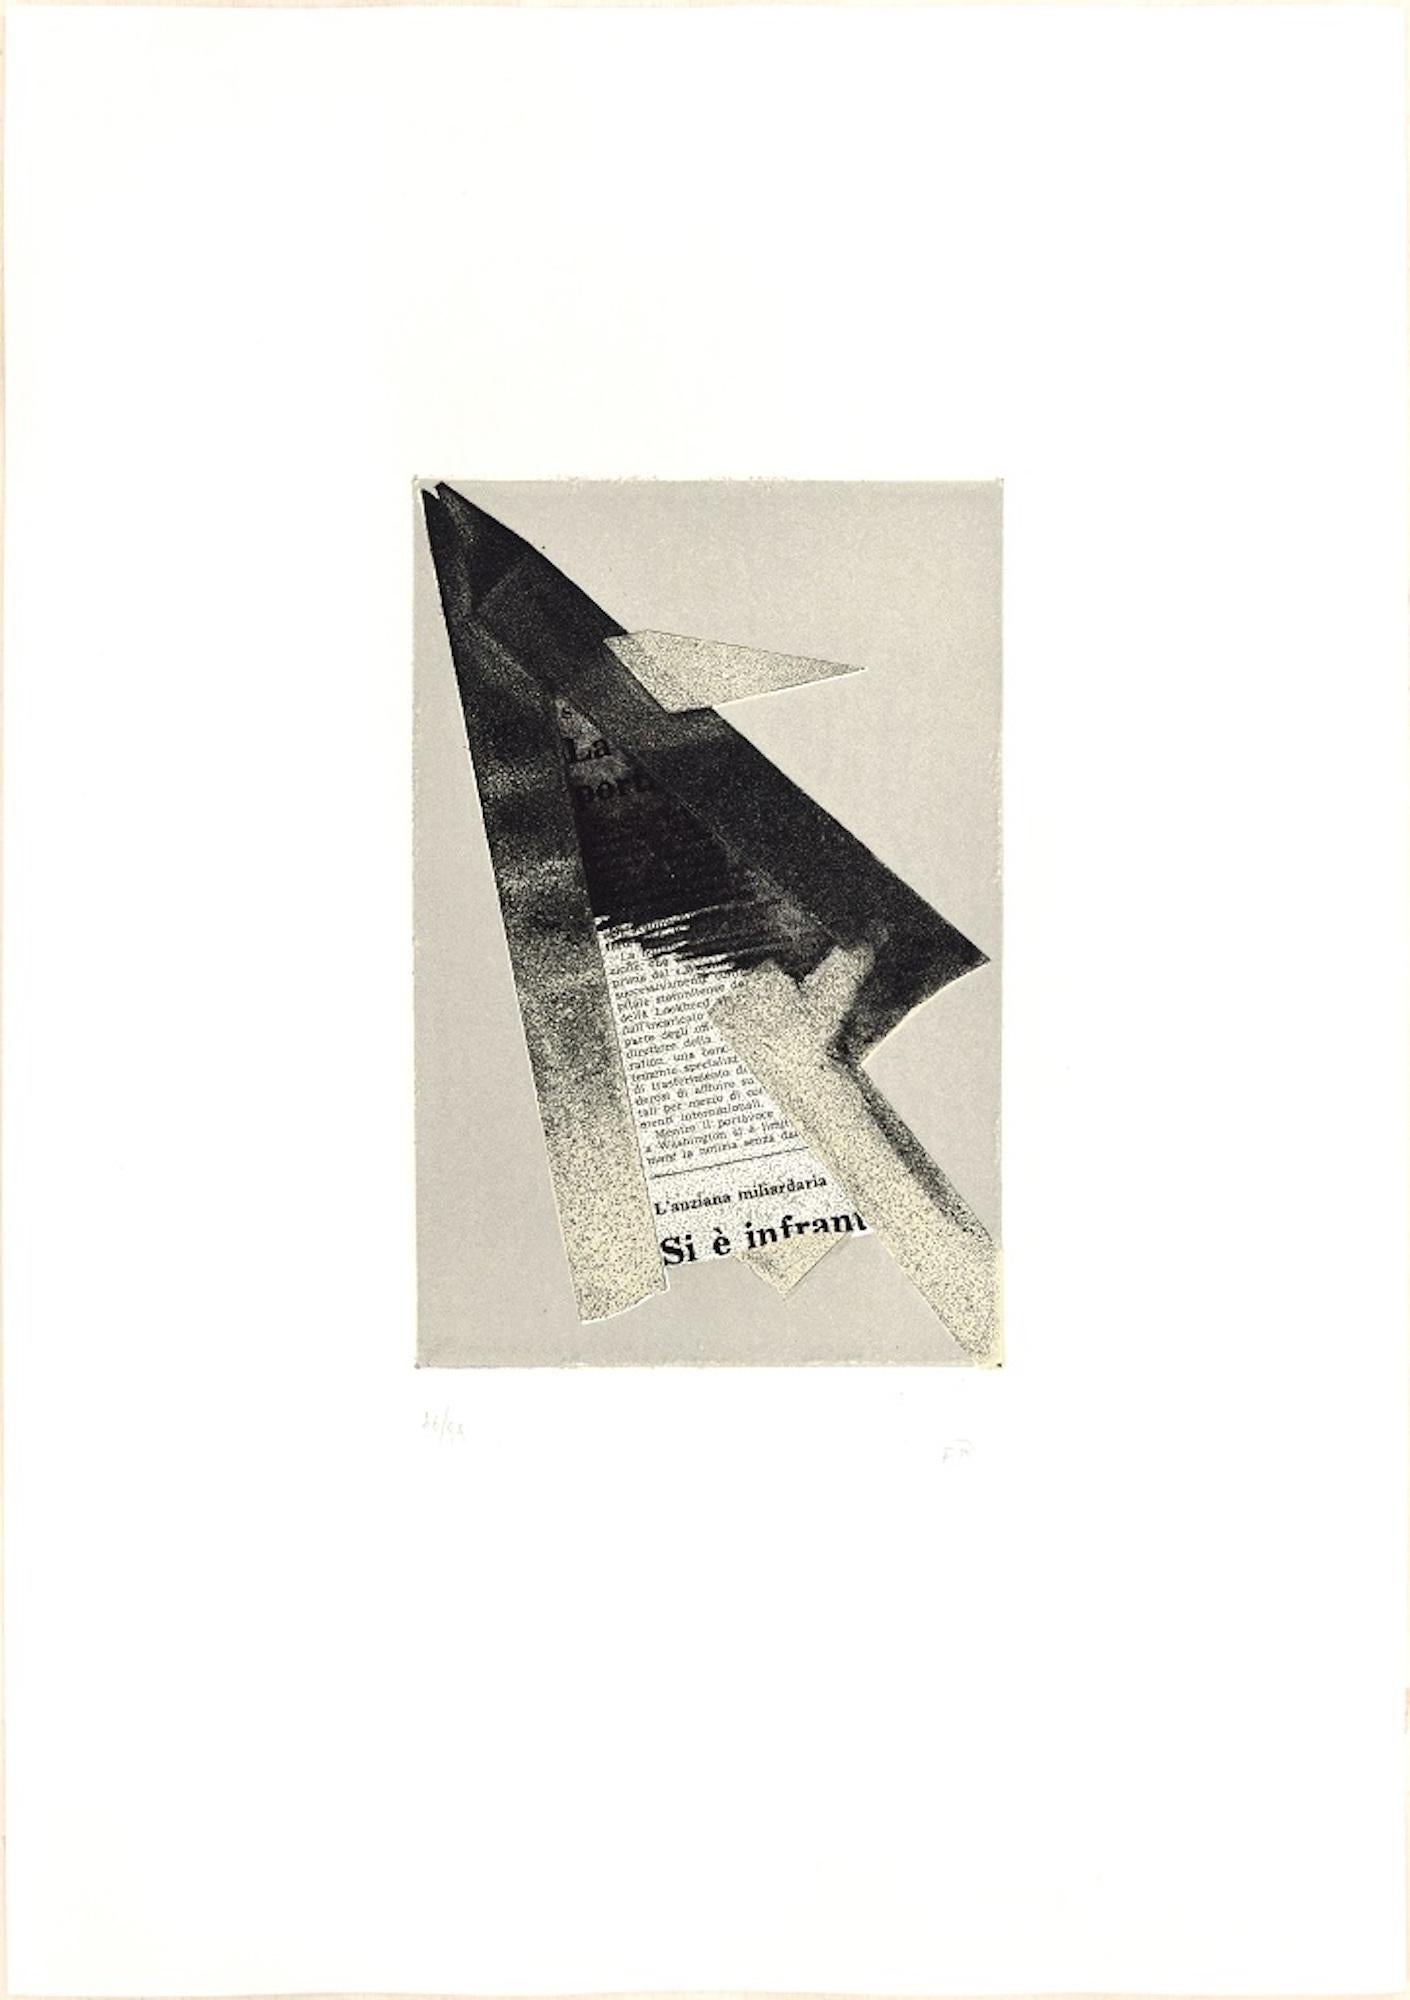 Image dimensions: 22x14.4 cm.

Untitled is a colored etching and collage on paper, realized in 1973 by the artist, Hans Richter, published by La Nuova Foglio, a publishing house of Macerata.

Monogrammed and numbered in pencil on lower margin.